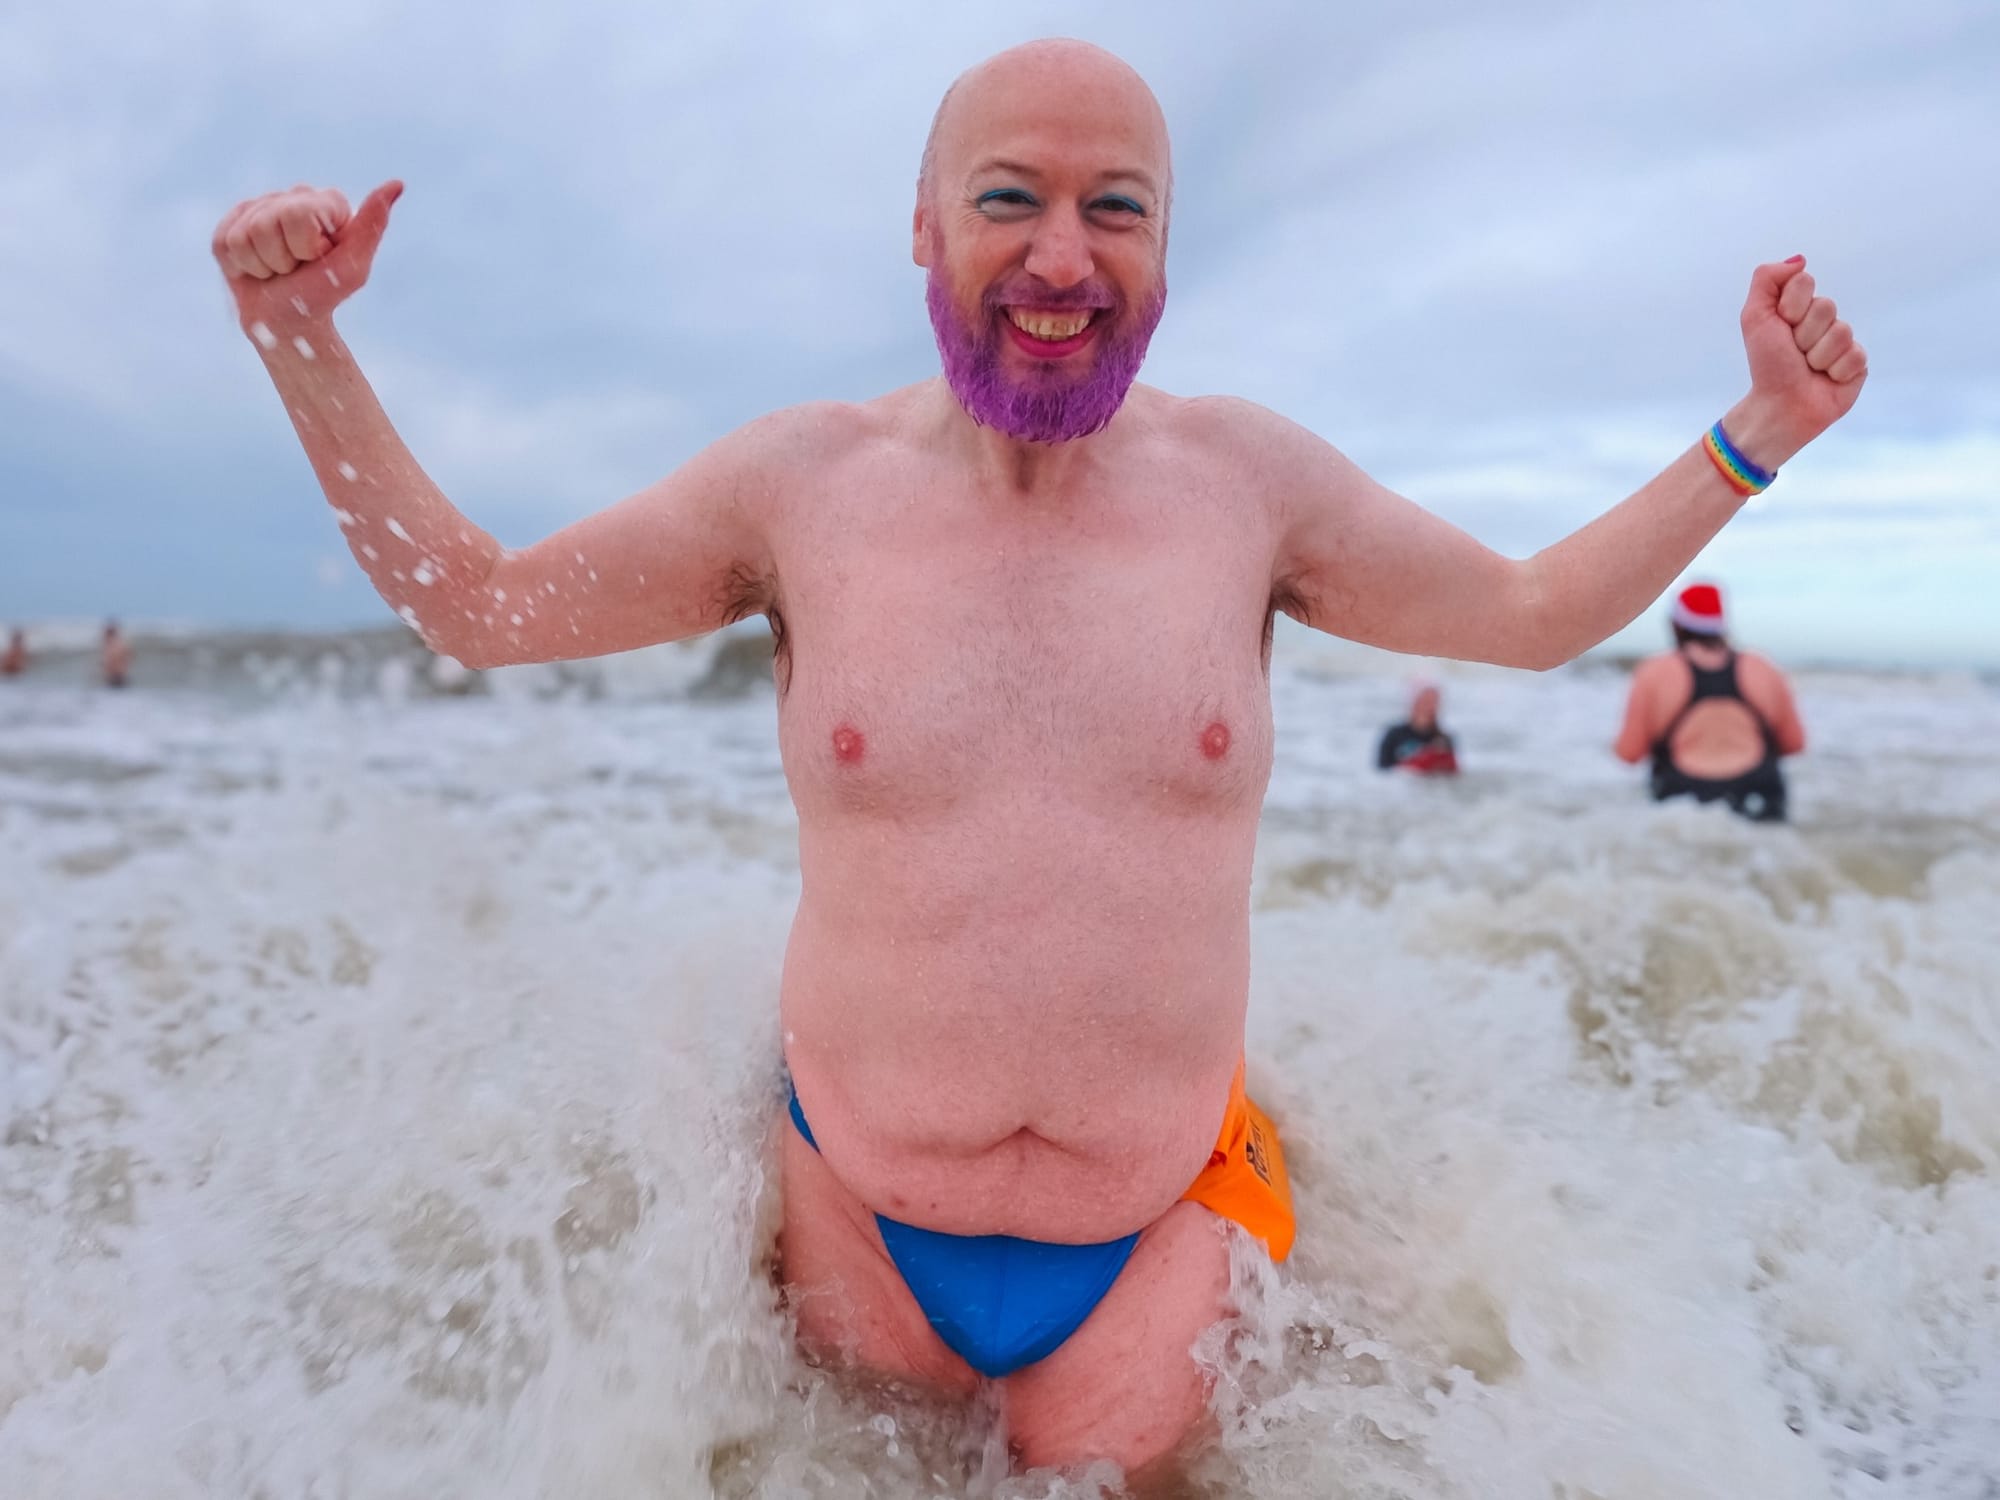 A happy non-binary person wearing only a tiny blue thong raises their fists in the air while the waves crash around them.